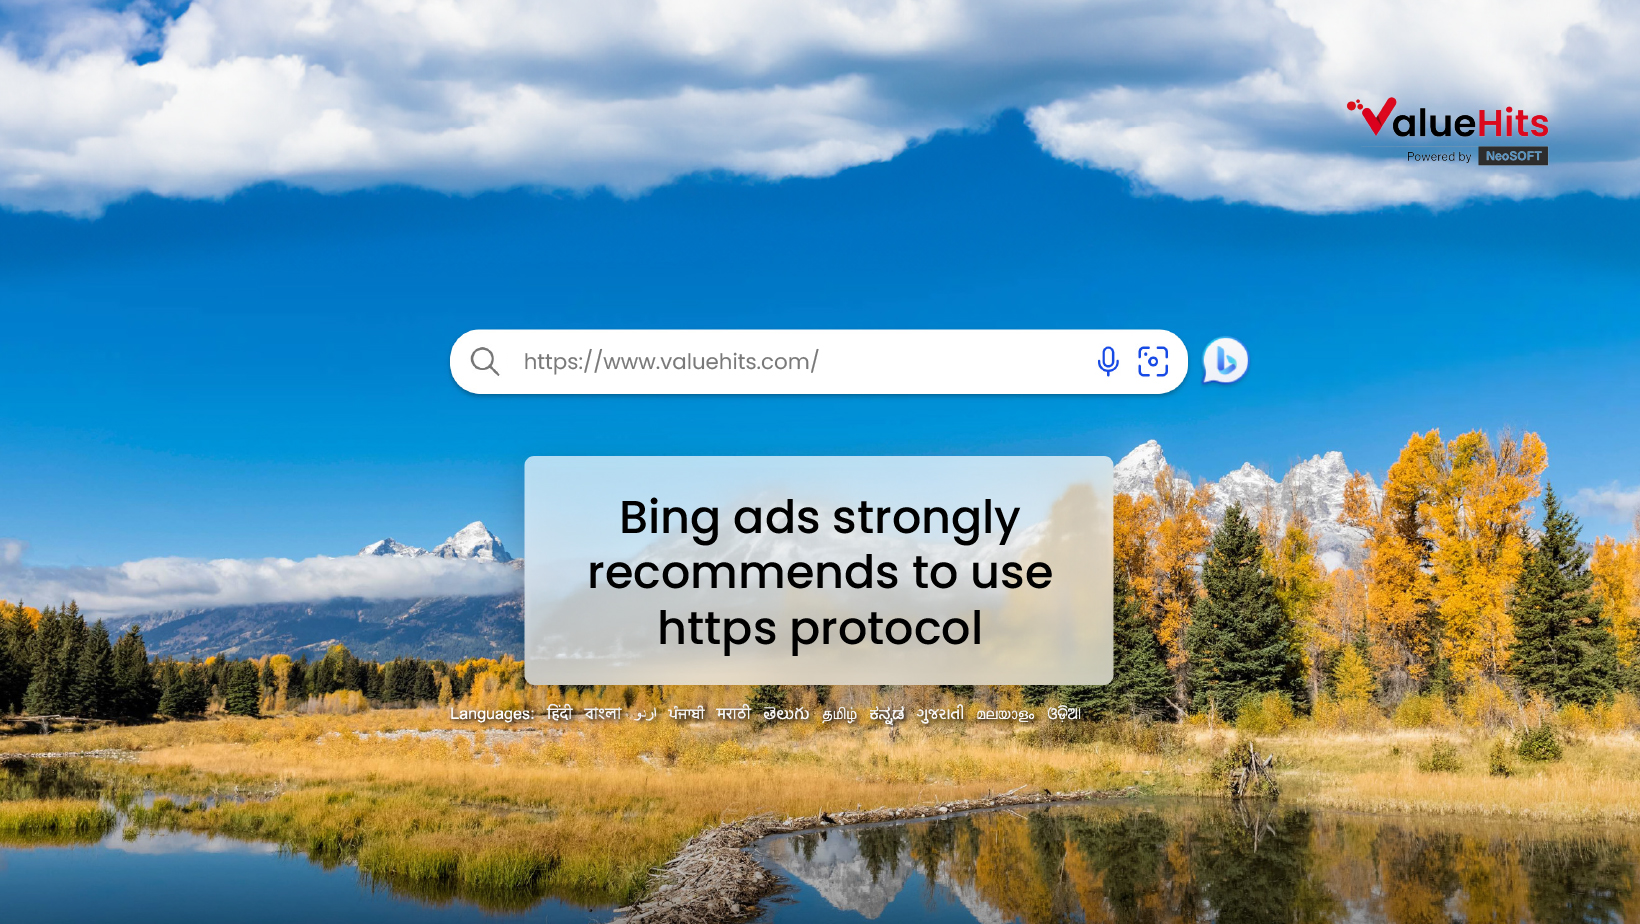 Bing ads strongly recommends to use https protocol